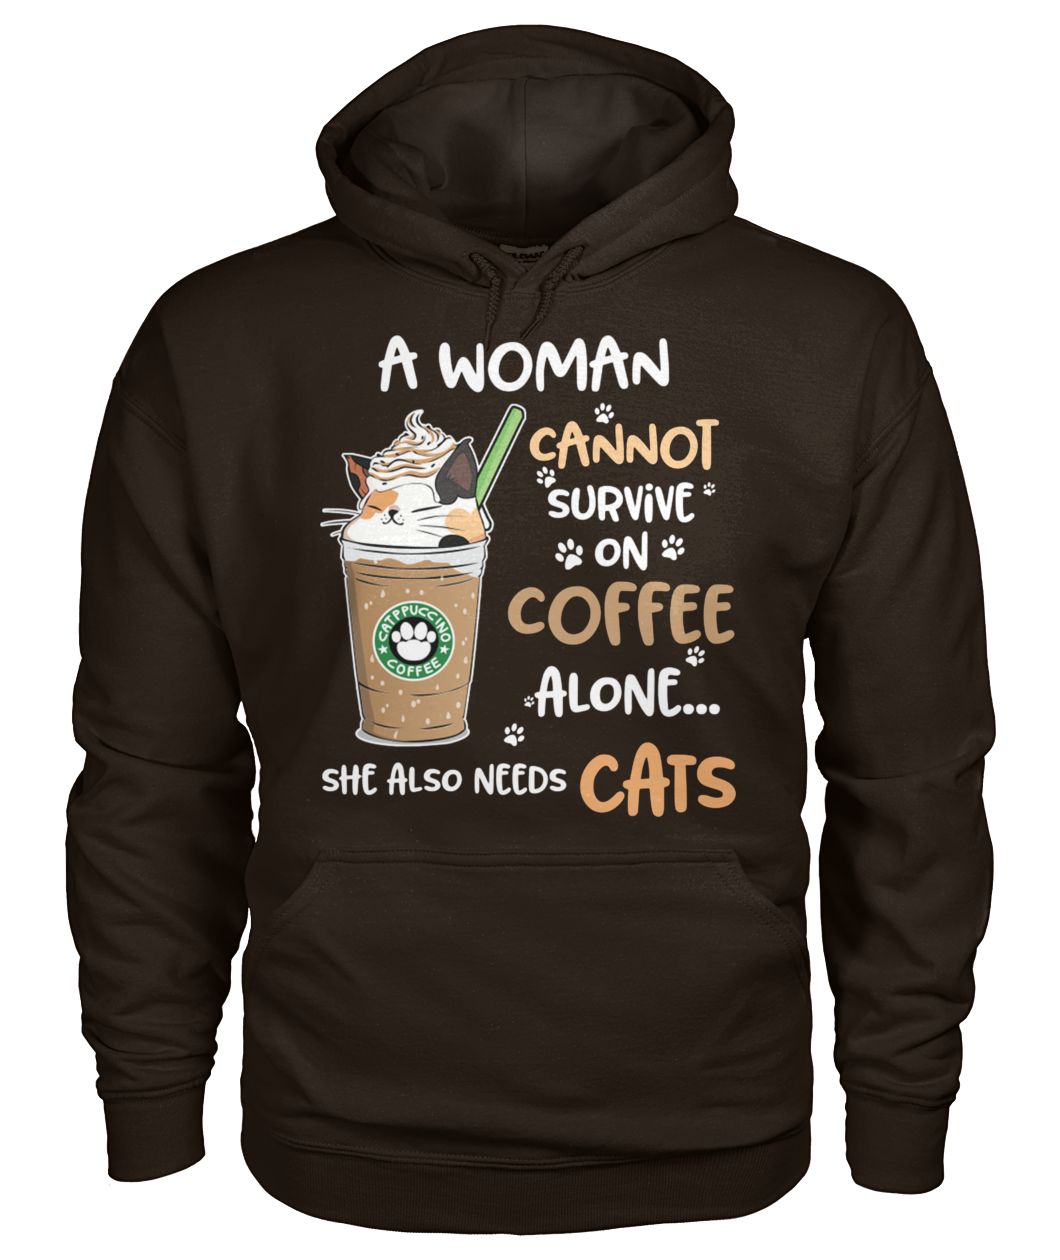 A woman cannot survive on coffee alone she also needs cats gildan hoodie